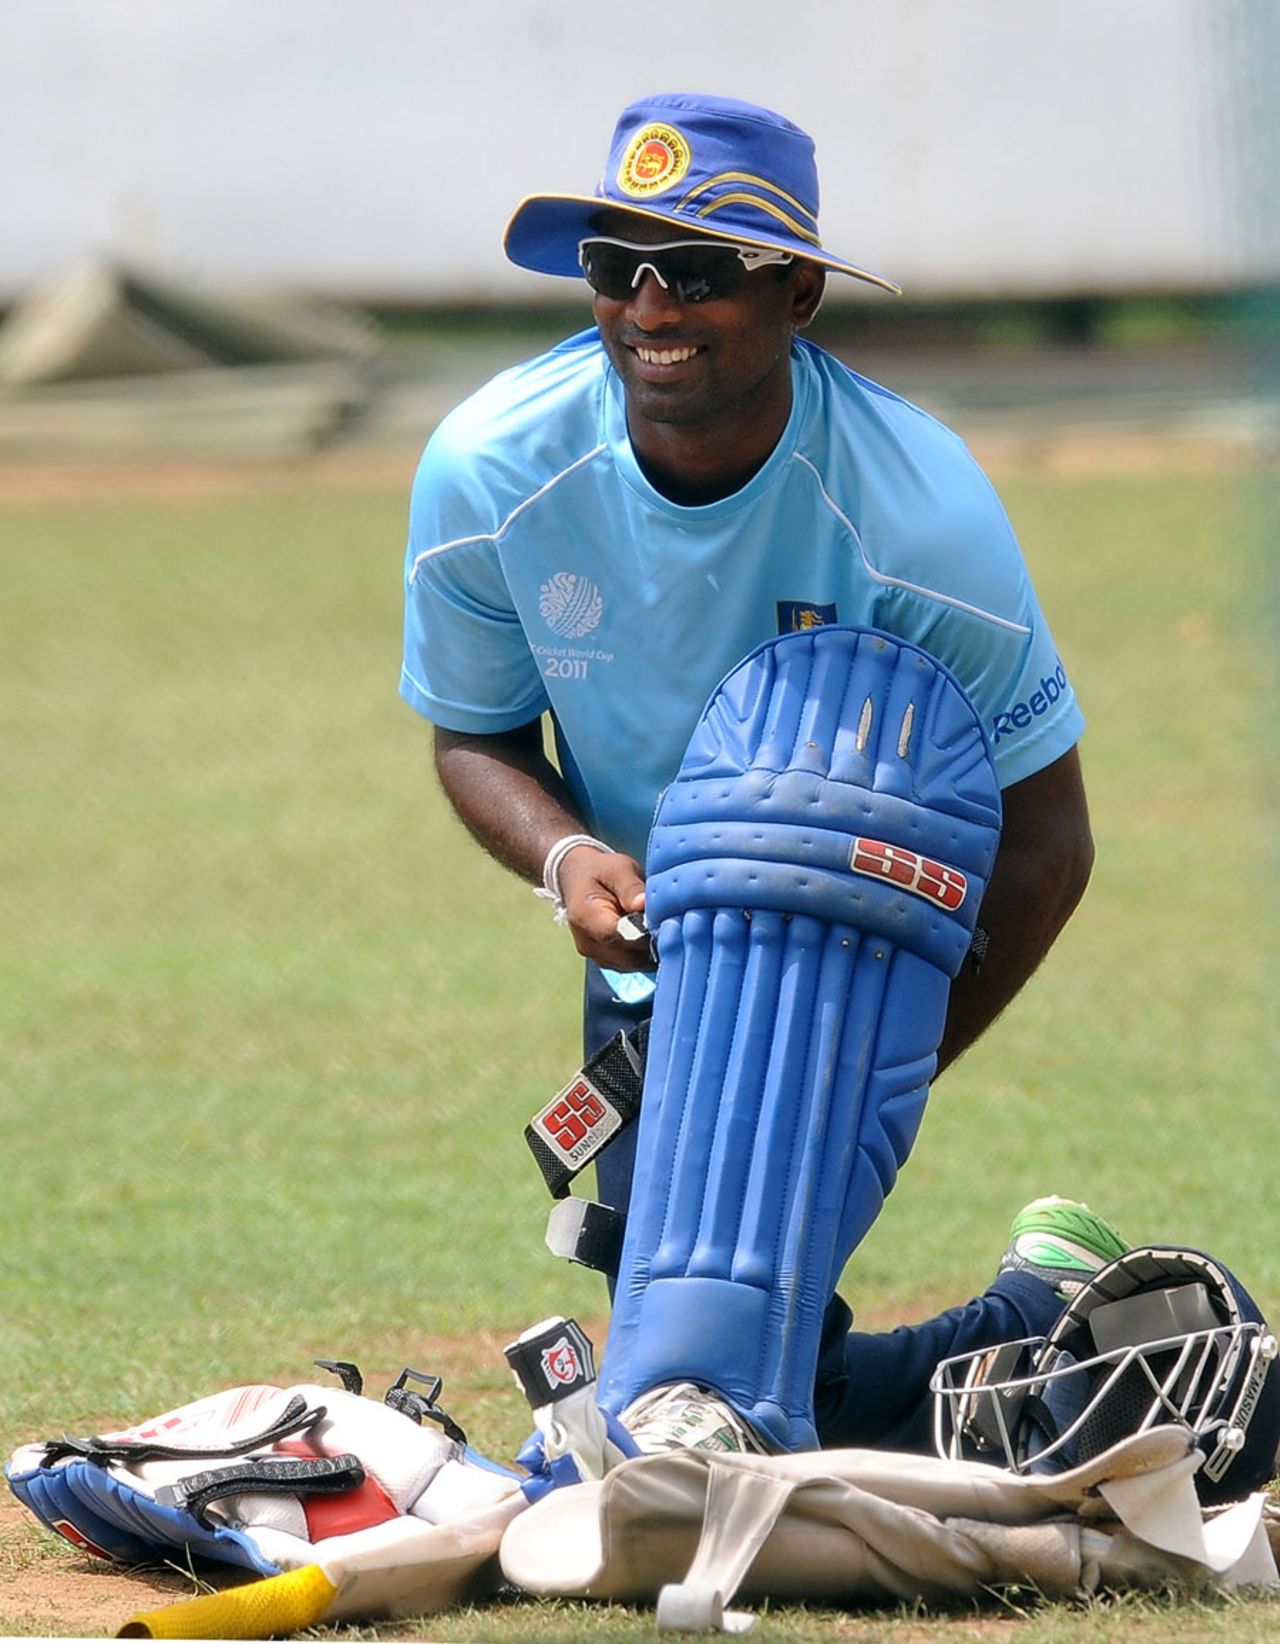 Chamara Silva pads up during practice, Colombo February 28, 2011